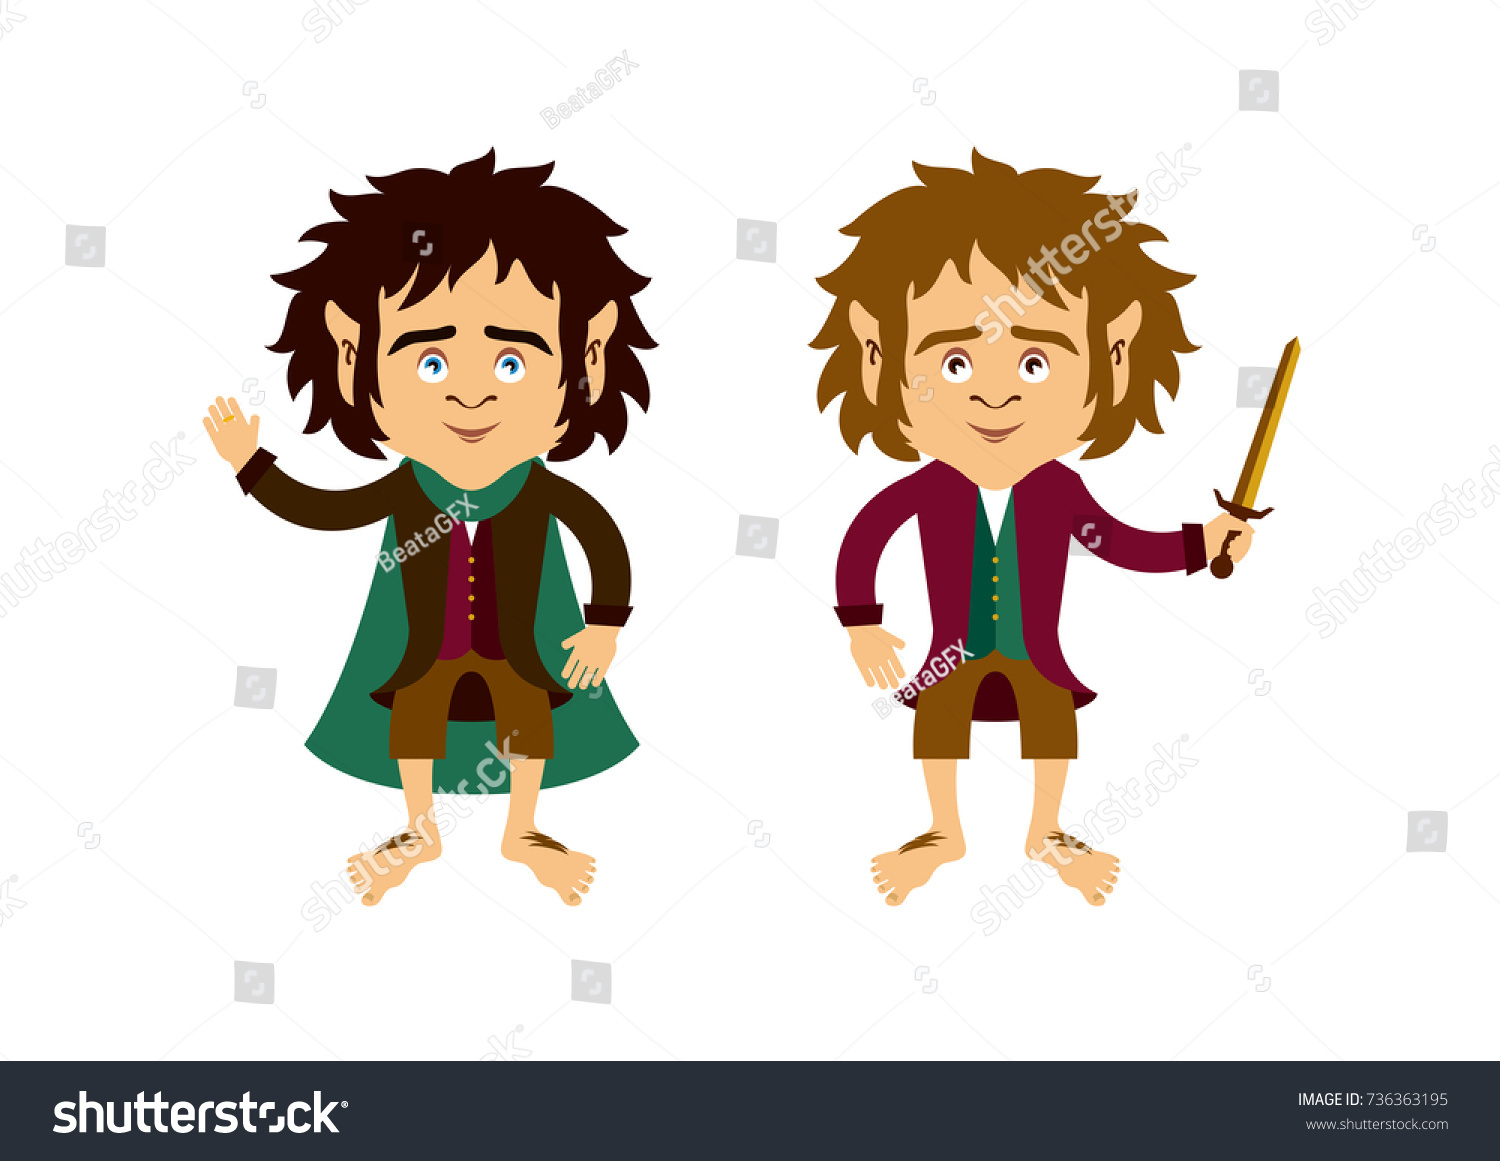 SVG of Hobbit cartoon character. Hobbit vector. Hobbit isolated on a white background svg